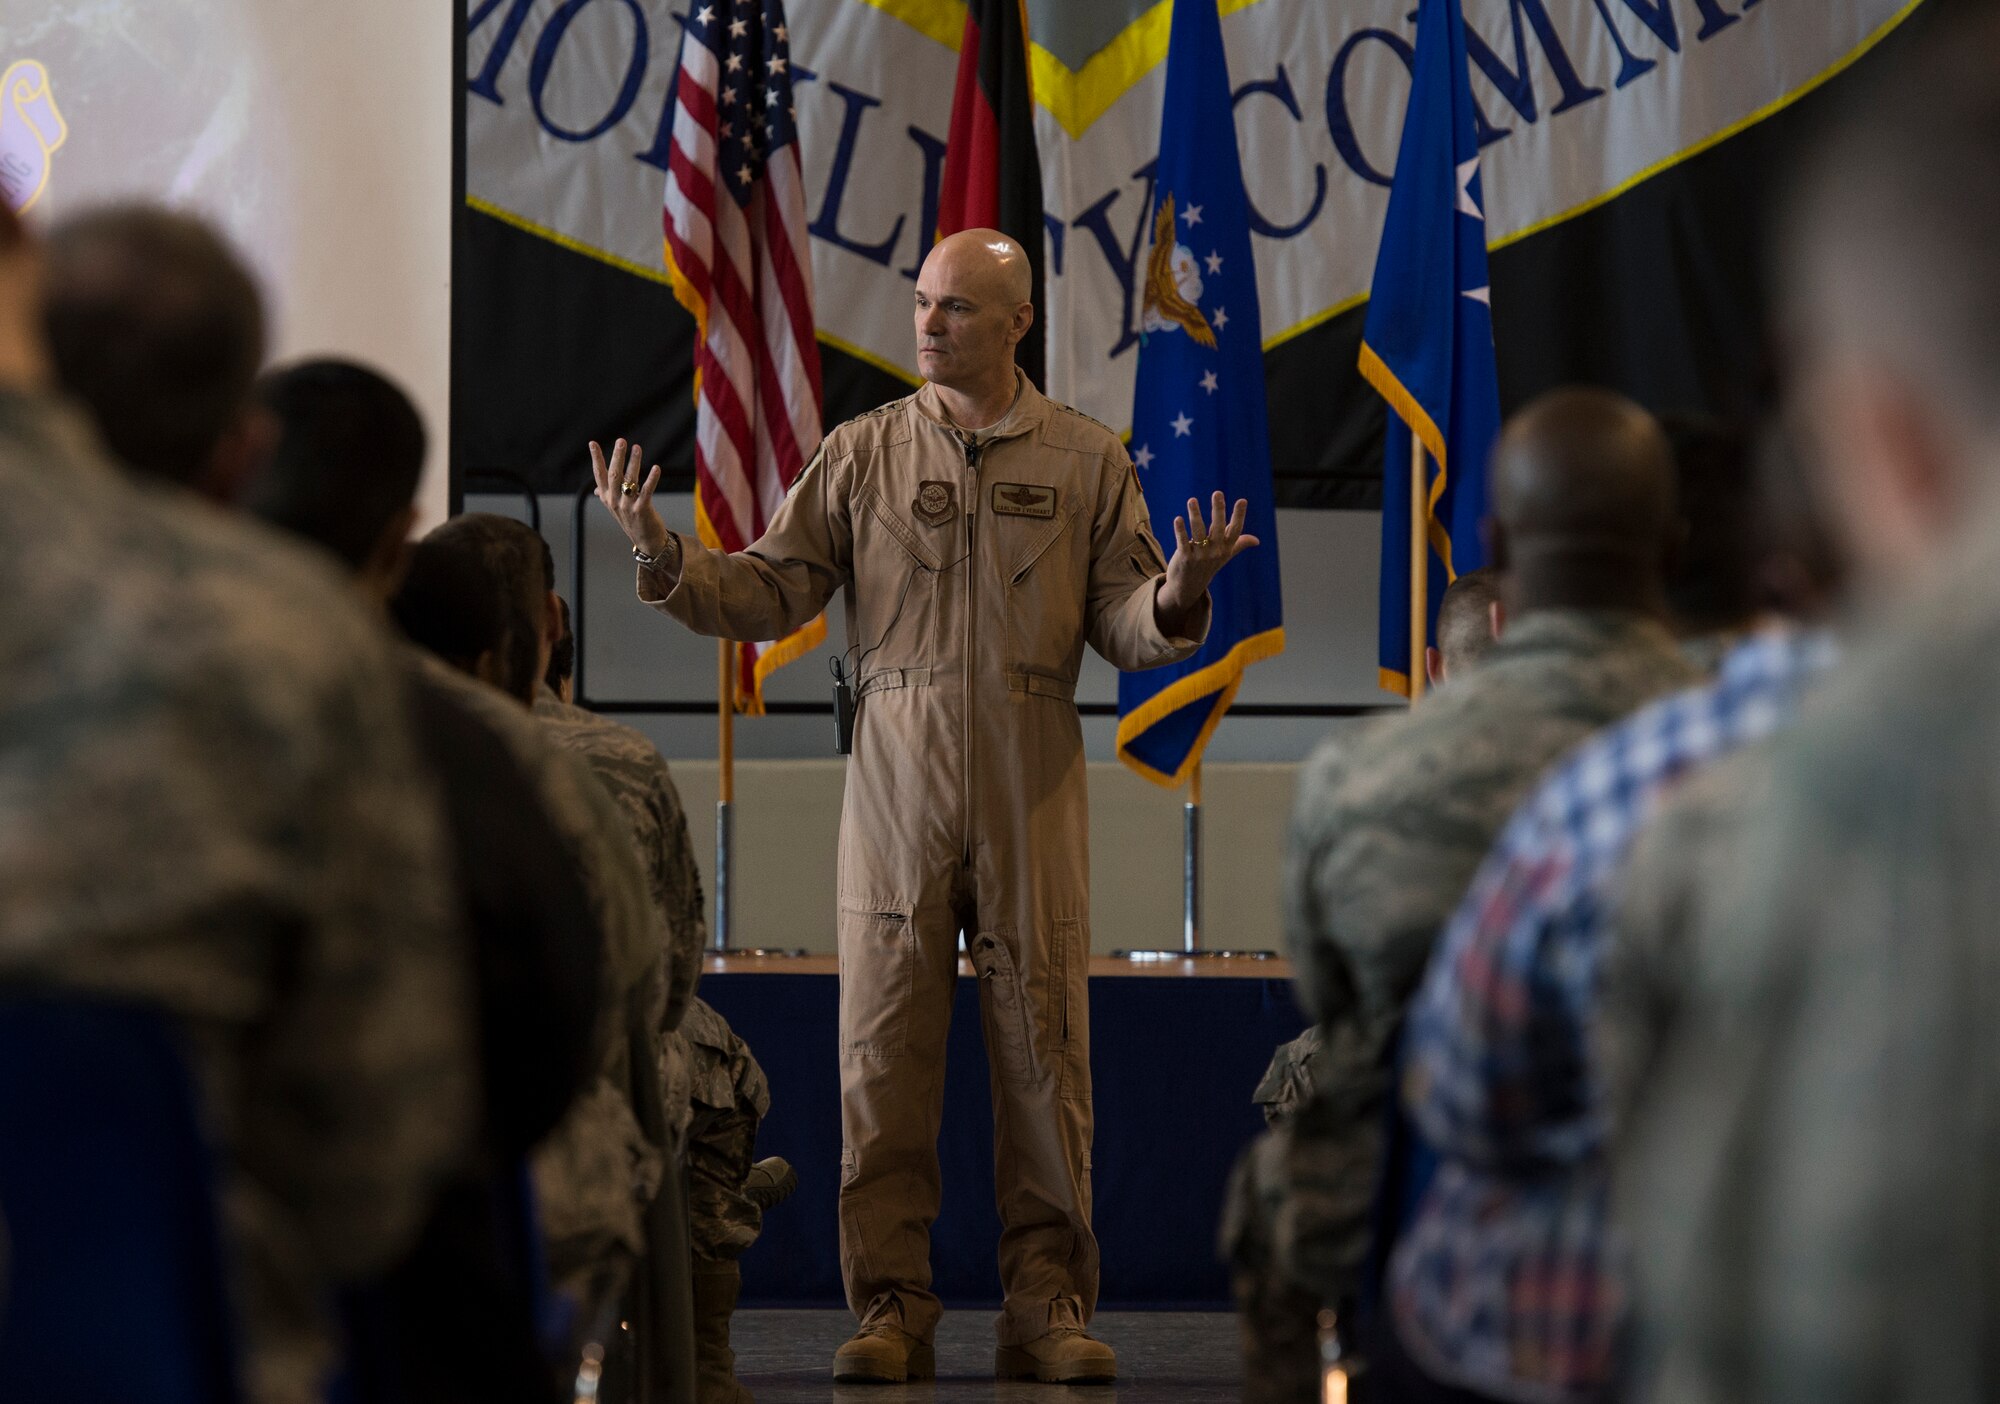 Gen. Carlton D. Everhart, Air Mobility Command commander, talks with Airmen from the 521st Air Mobility Operations Wing during his visit at Ramstein Air Base, Germany, March 10, 2016. The general visited the 521st Airmen to see how they perform their day to day jobs and contribute to global reach. (U.S. Air Force photo/Senior Airman Jonathan Stefanko)